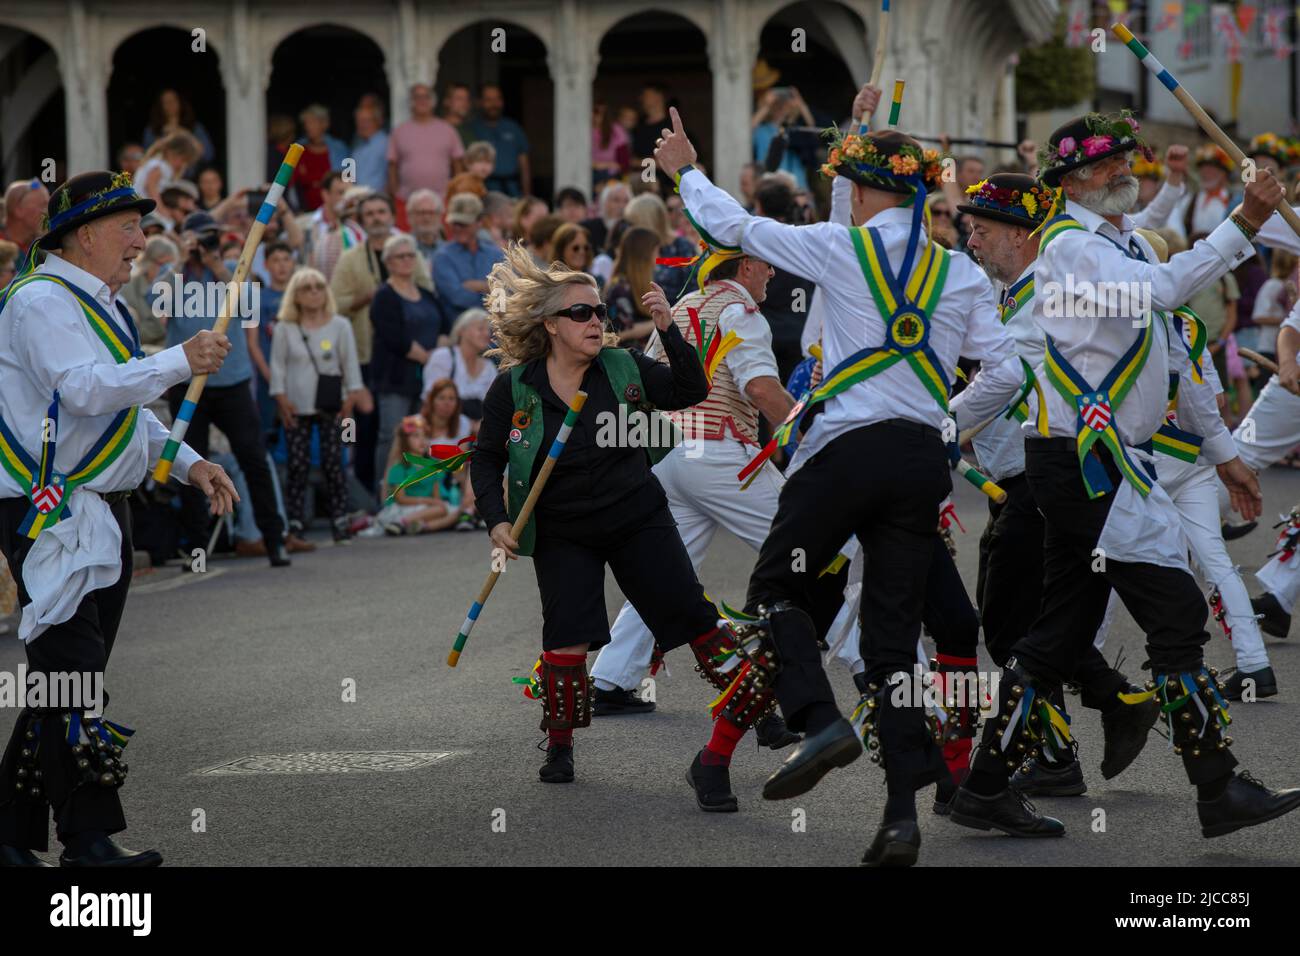 Thaxted, Essex, UK. 11th June 2022.  Sam Harker of the Baldock Midnight Morris on left battles with members of the Peterborough side during massed dancing on Town Street Thaxted. A meeting of member clubs of the Morris Ring celebrating the 90th anniversary of the founding of the Thaxted Morris Dancing side or team in Thaxted, North West Essex, England UK.  In the late afternoon all the sides congregate in Thaxted where mas Credit: BRIAN HARRIS/Alamy Live News Stock Photo